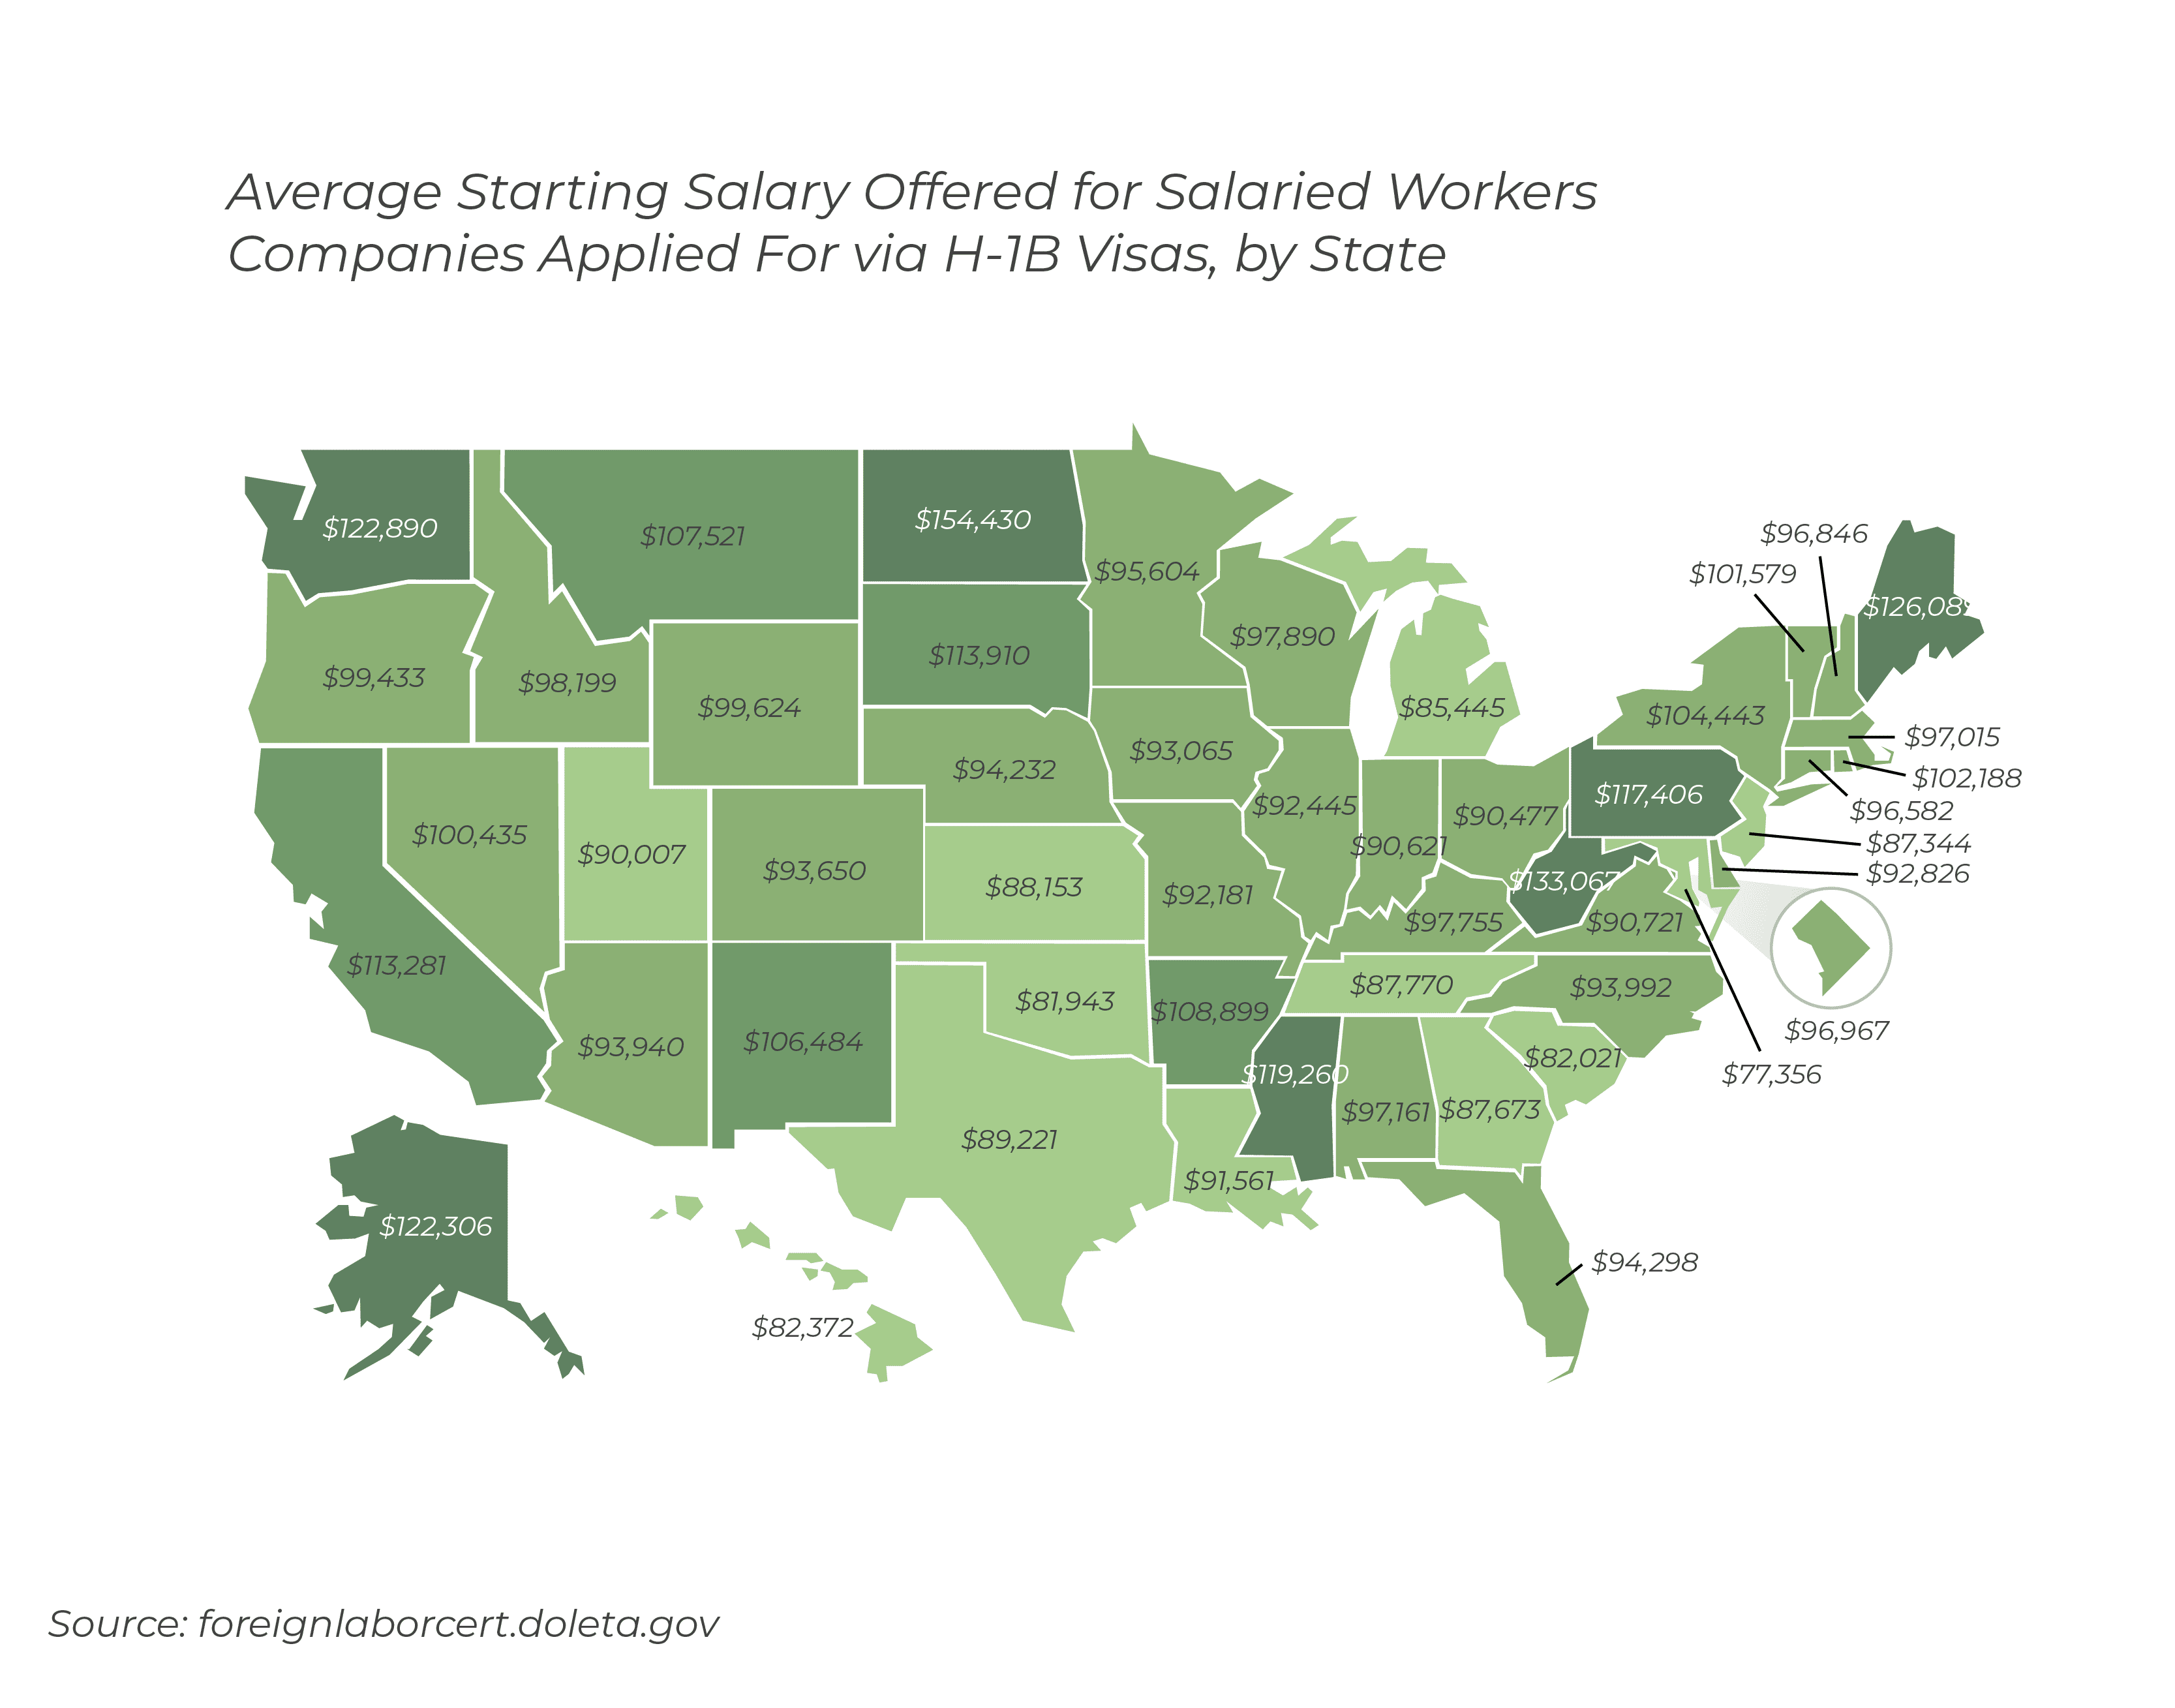 average-starting-salary-offered-for-salaried-workers-companies-applied-for-via-h-1b-visas-by-state